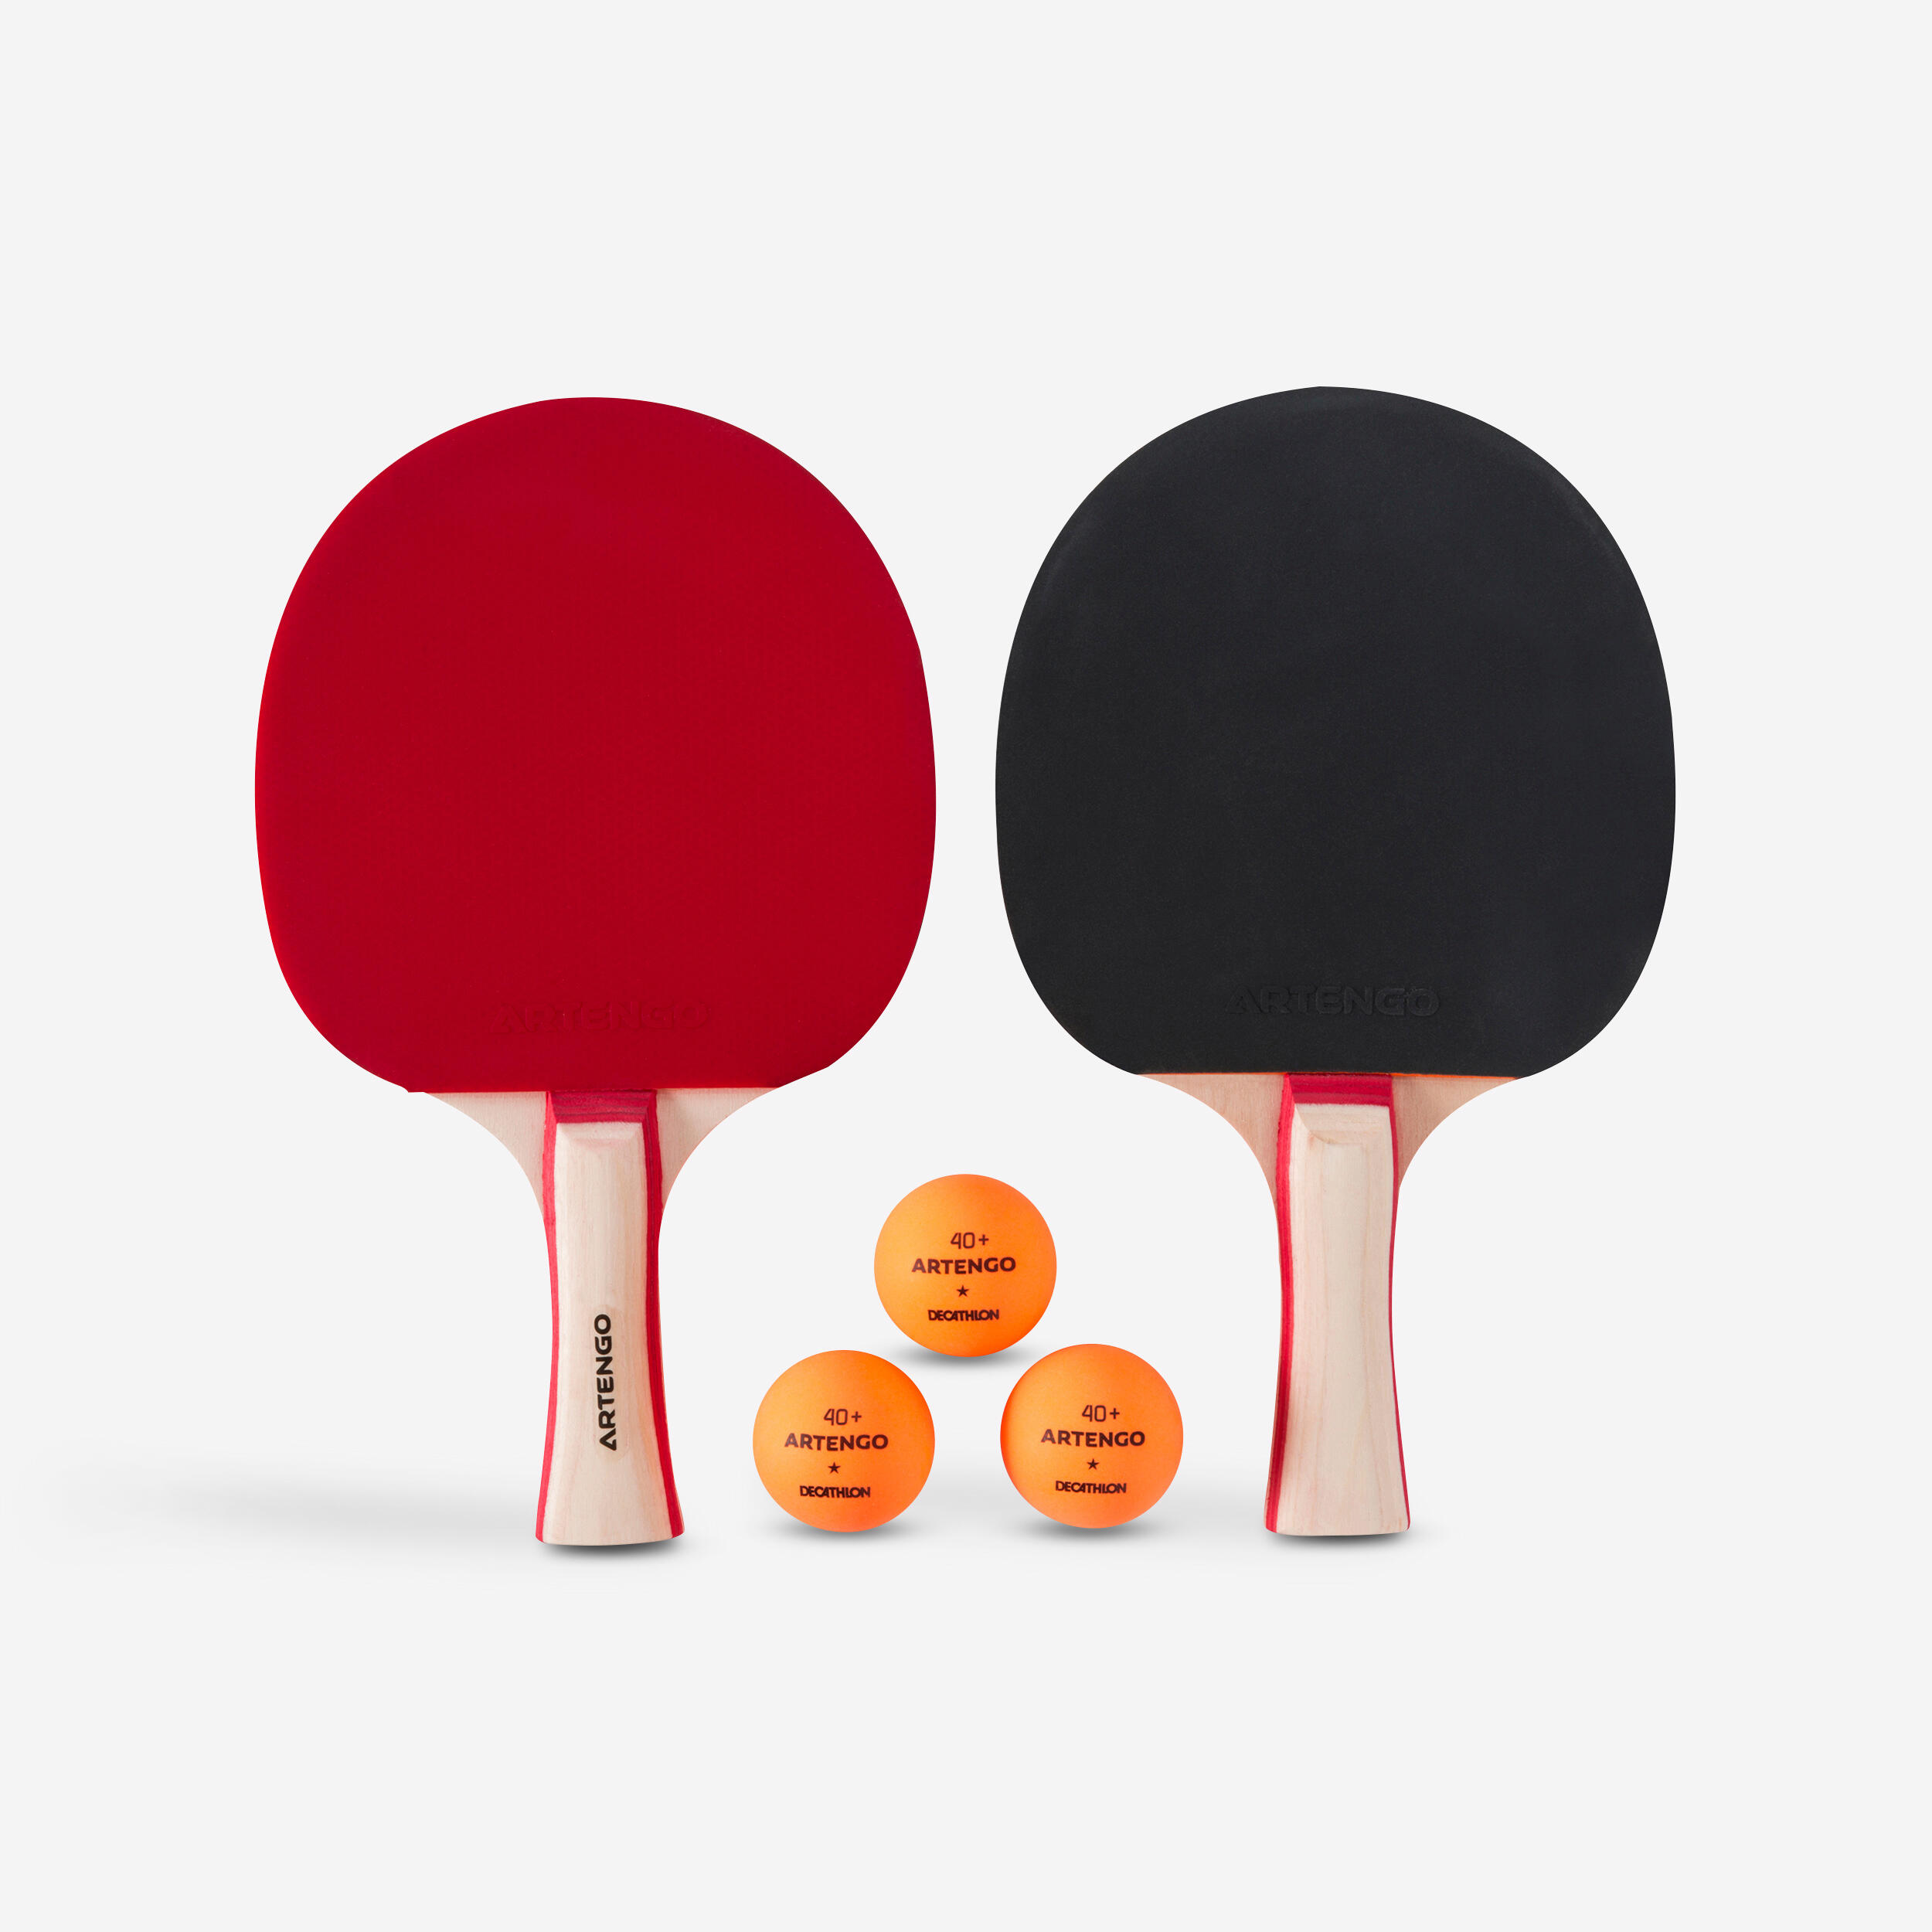 Ping Pong Trainer Set Portable Table Tennis Set Including 3 Balls Adjustable Height Leisure Decompression Indoor Outdoor Games Mobile Toys WHB Table Tennis Equipment Ball Sports Equipment